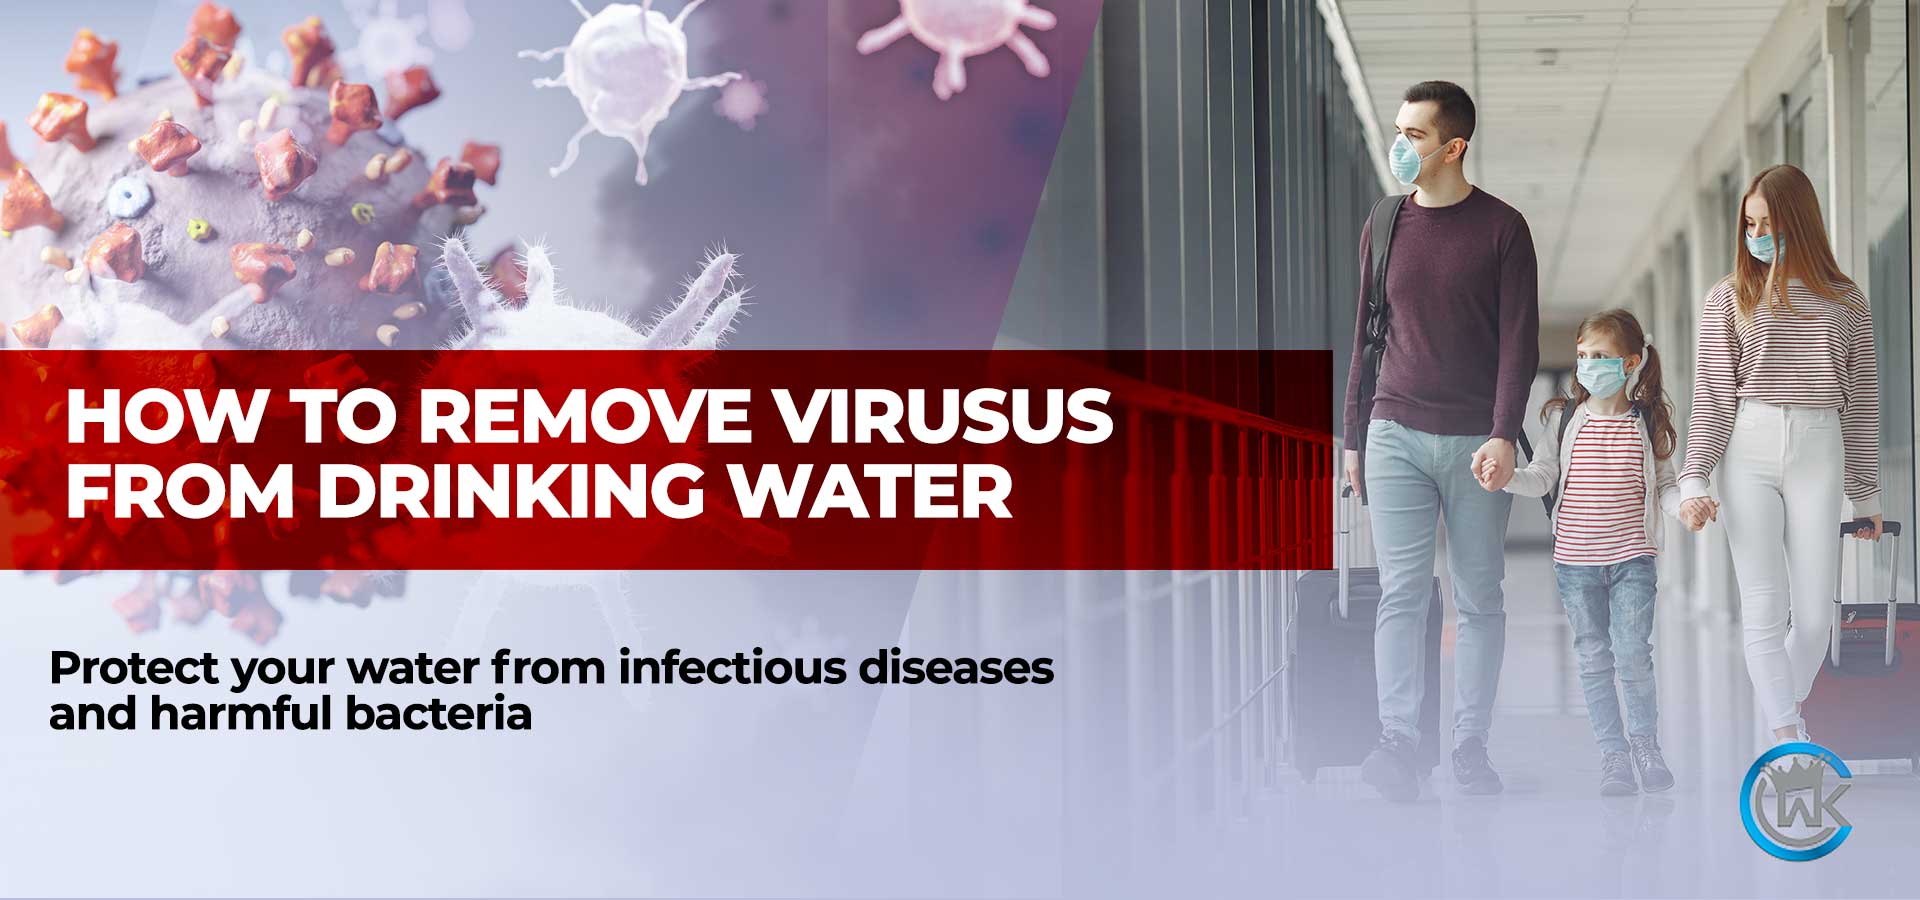 How to Remove Viruses from Drinking Water